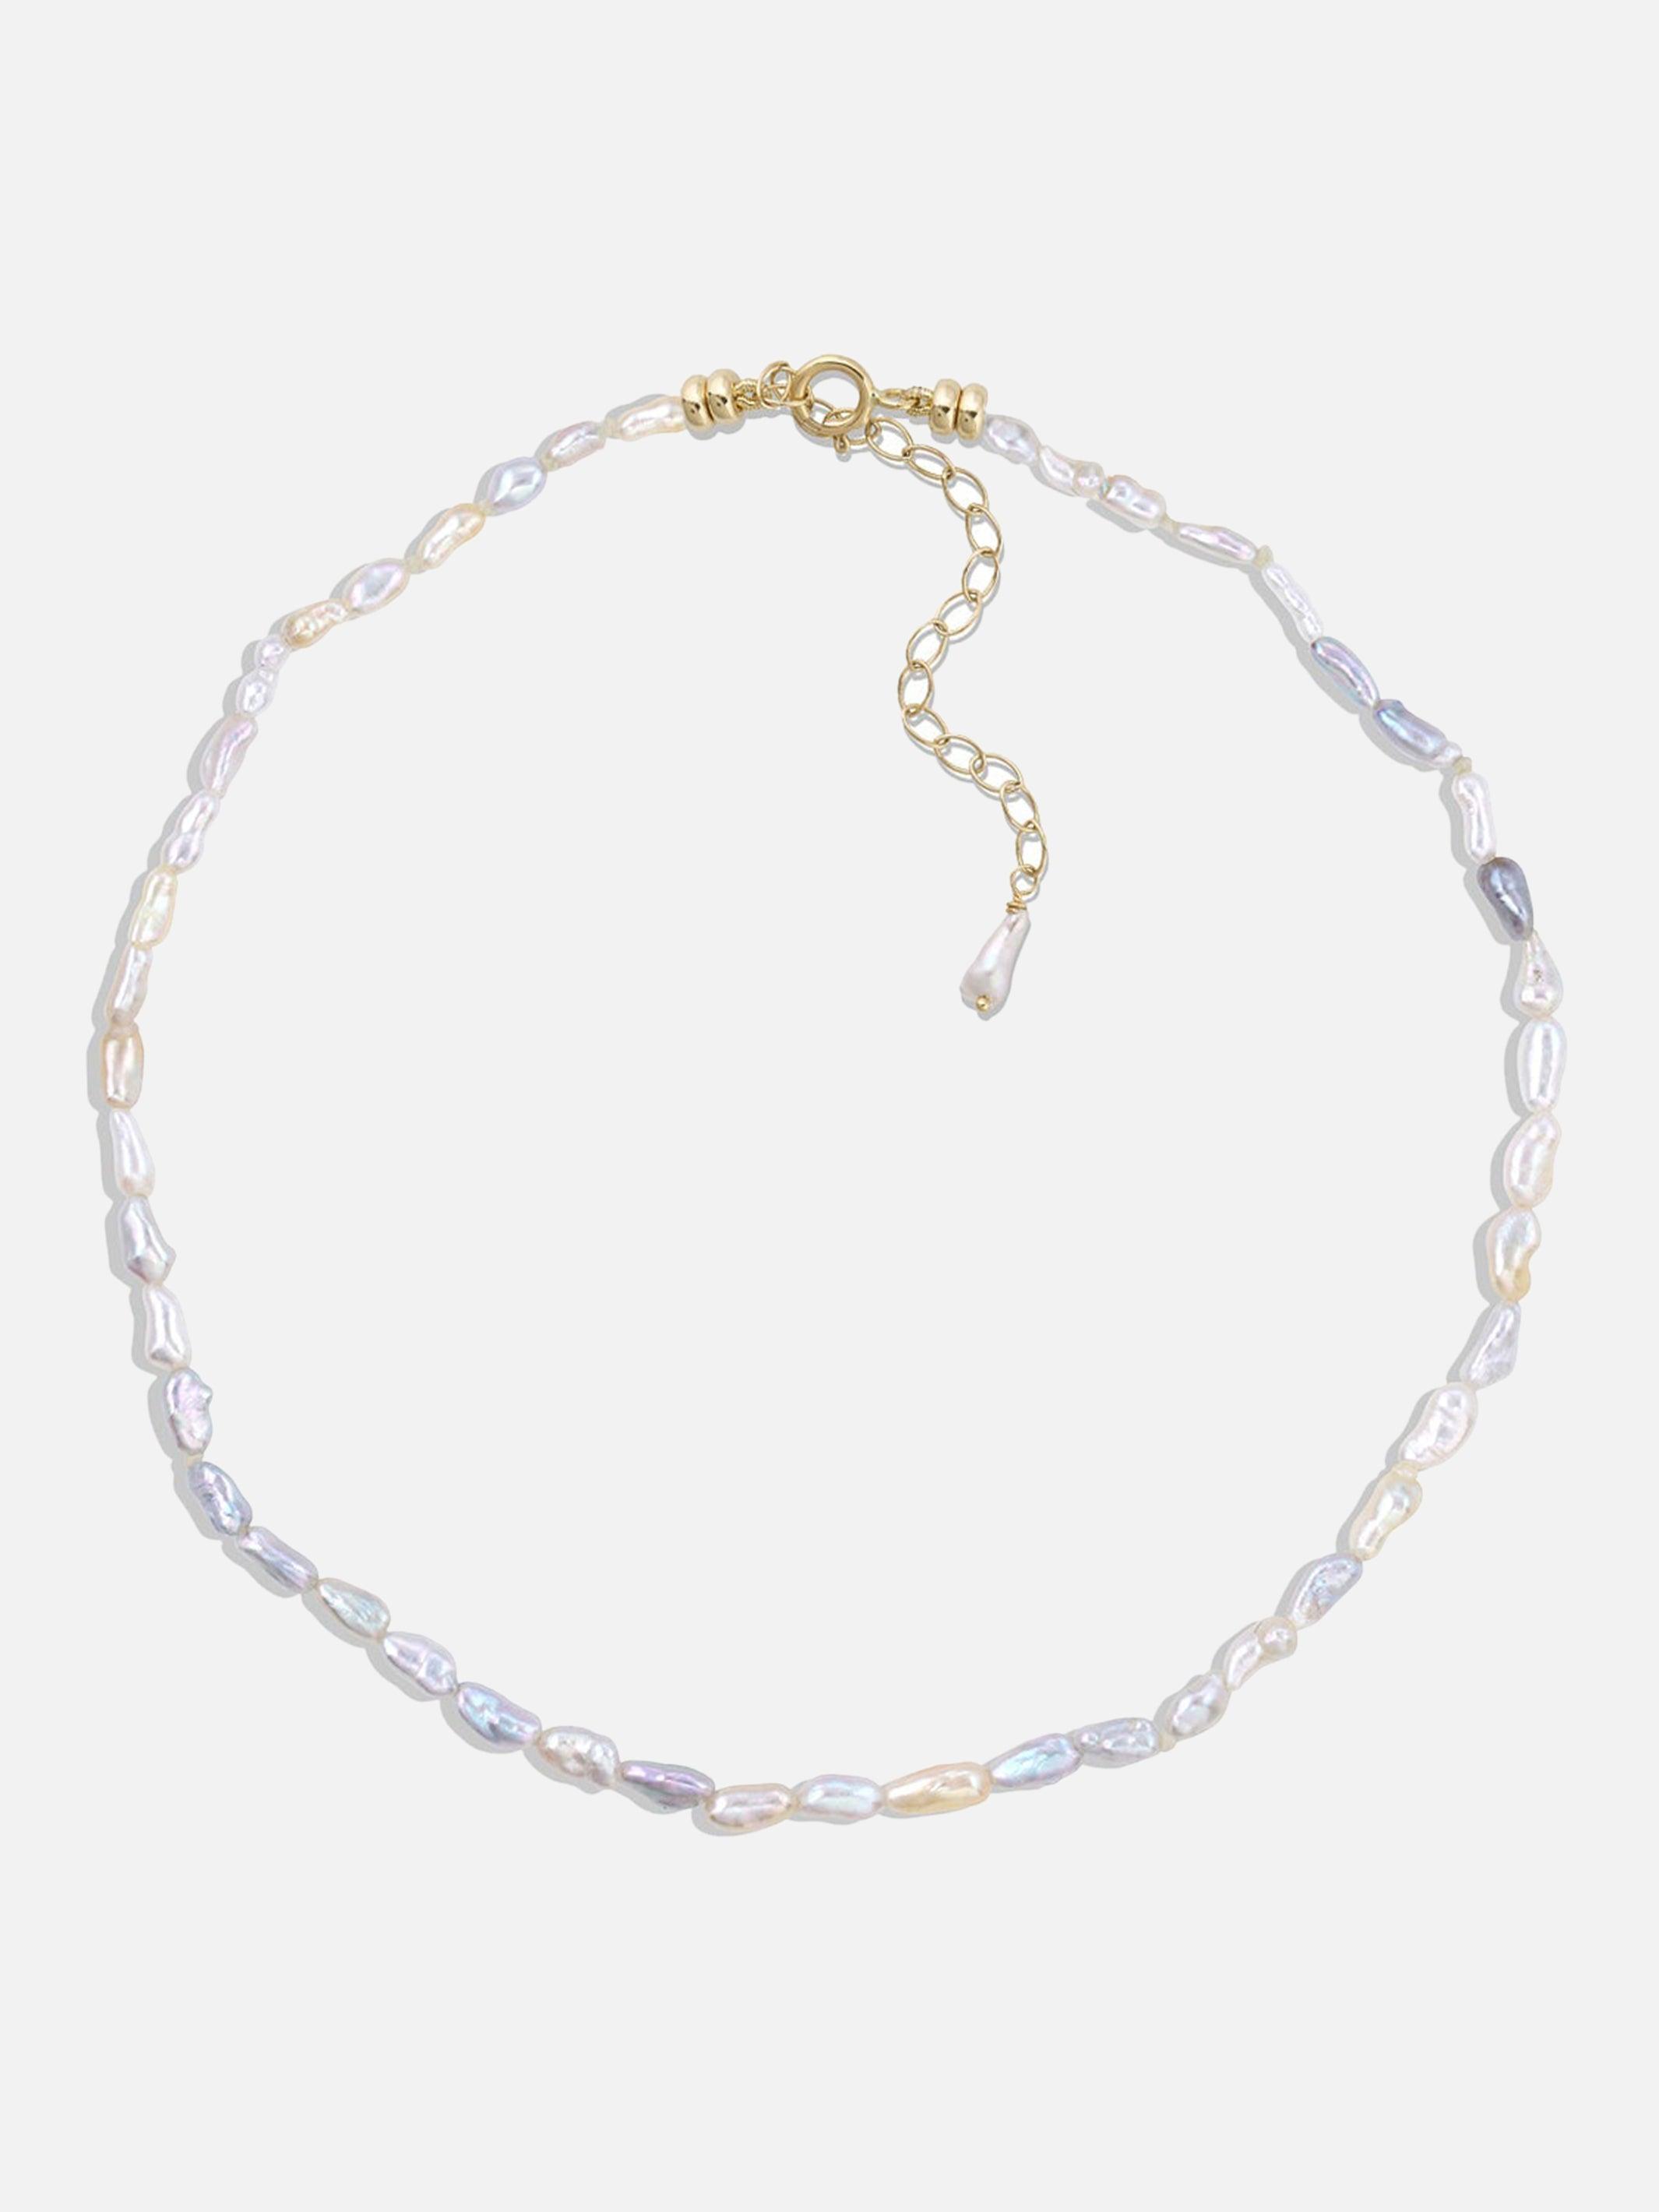 Pebble Pearl Bracelet - White/Space - At Present